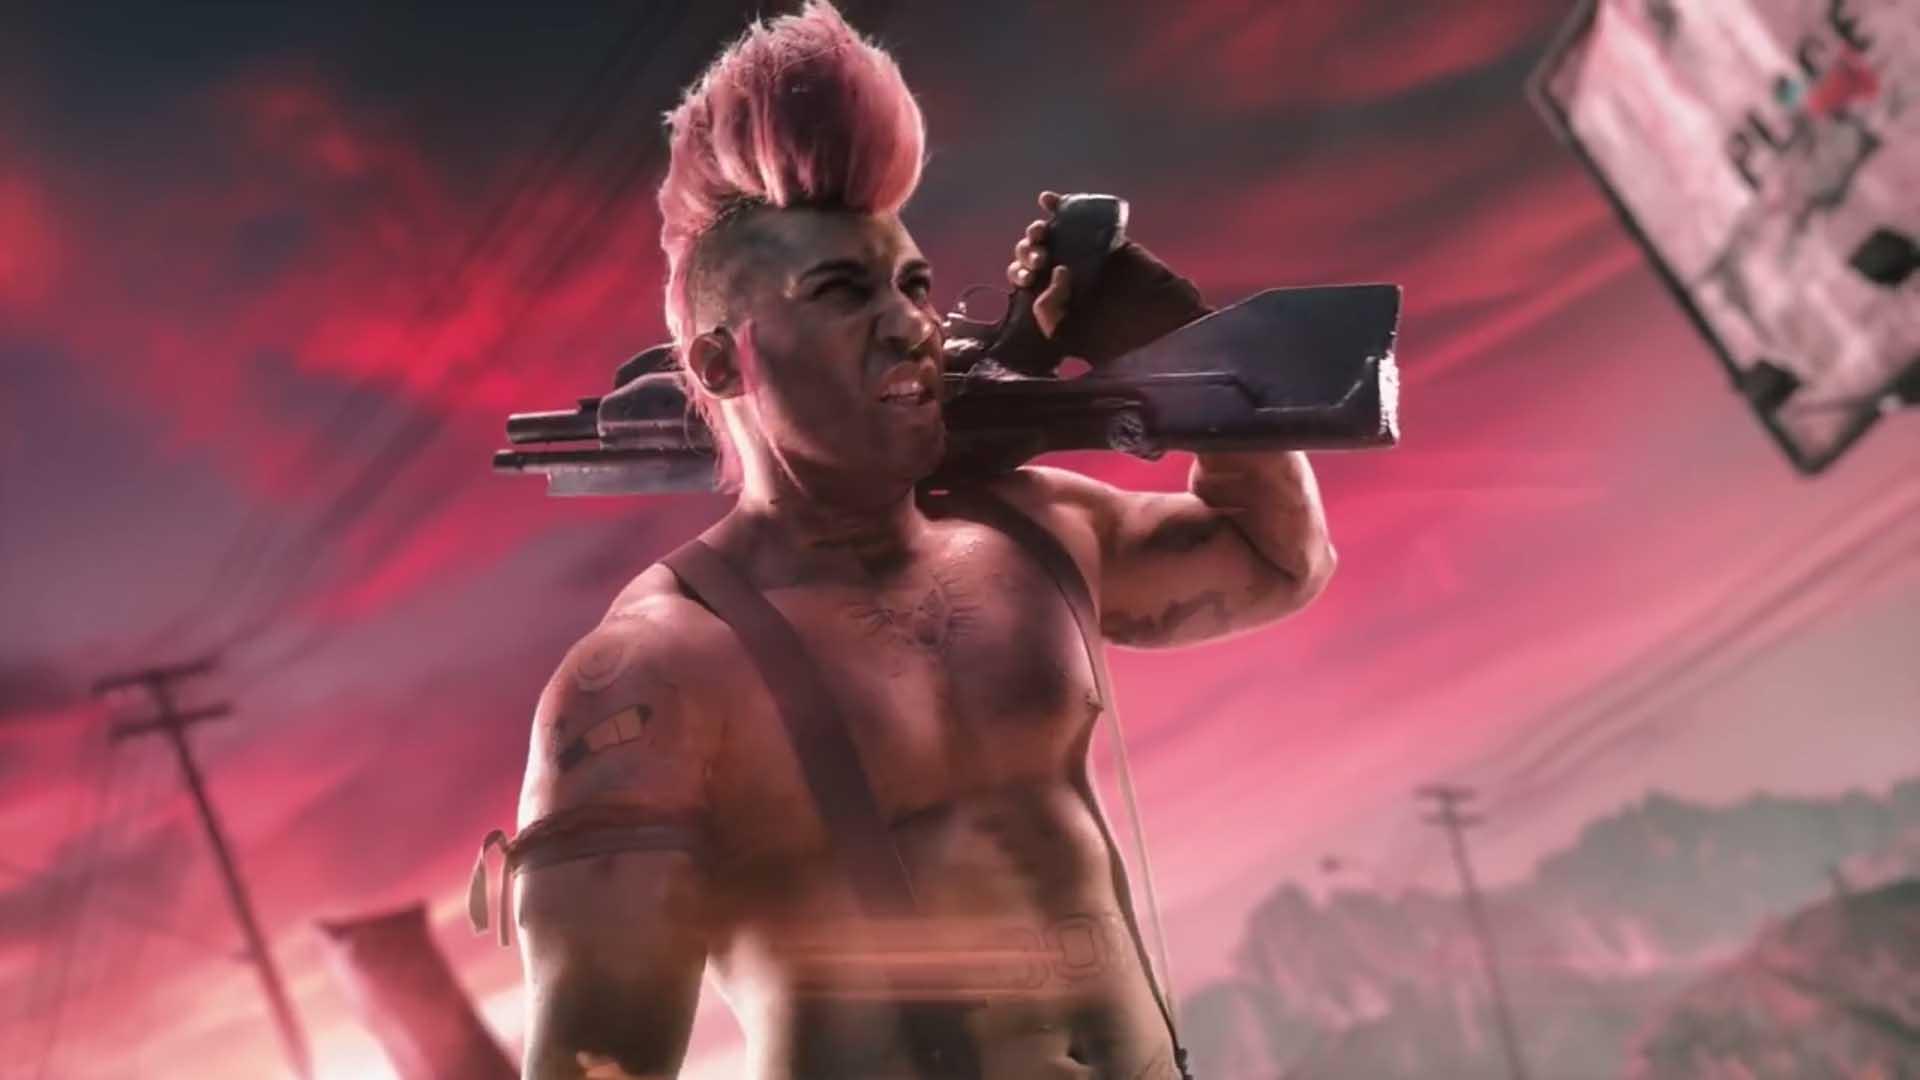 Rage 2 Confirmed By Bethesda (After 2 Leaks!) Xbox One & PC